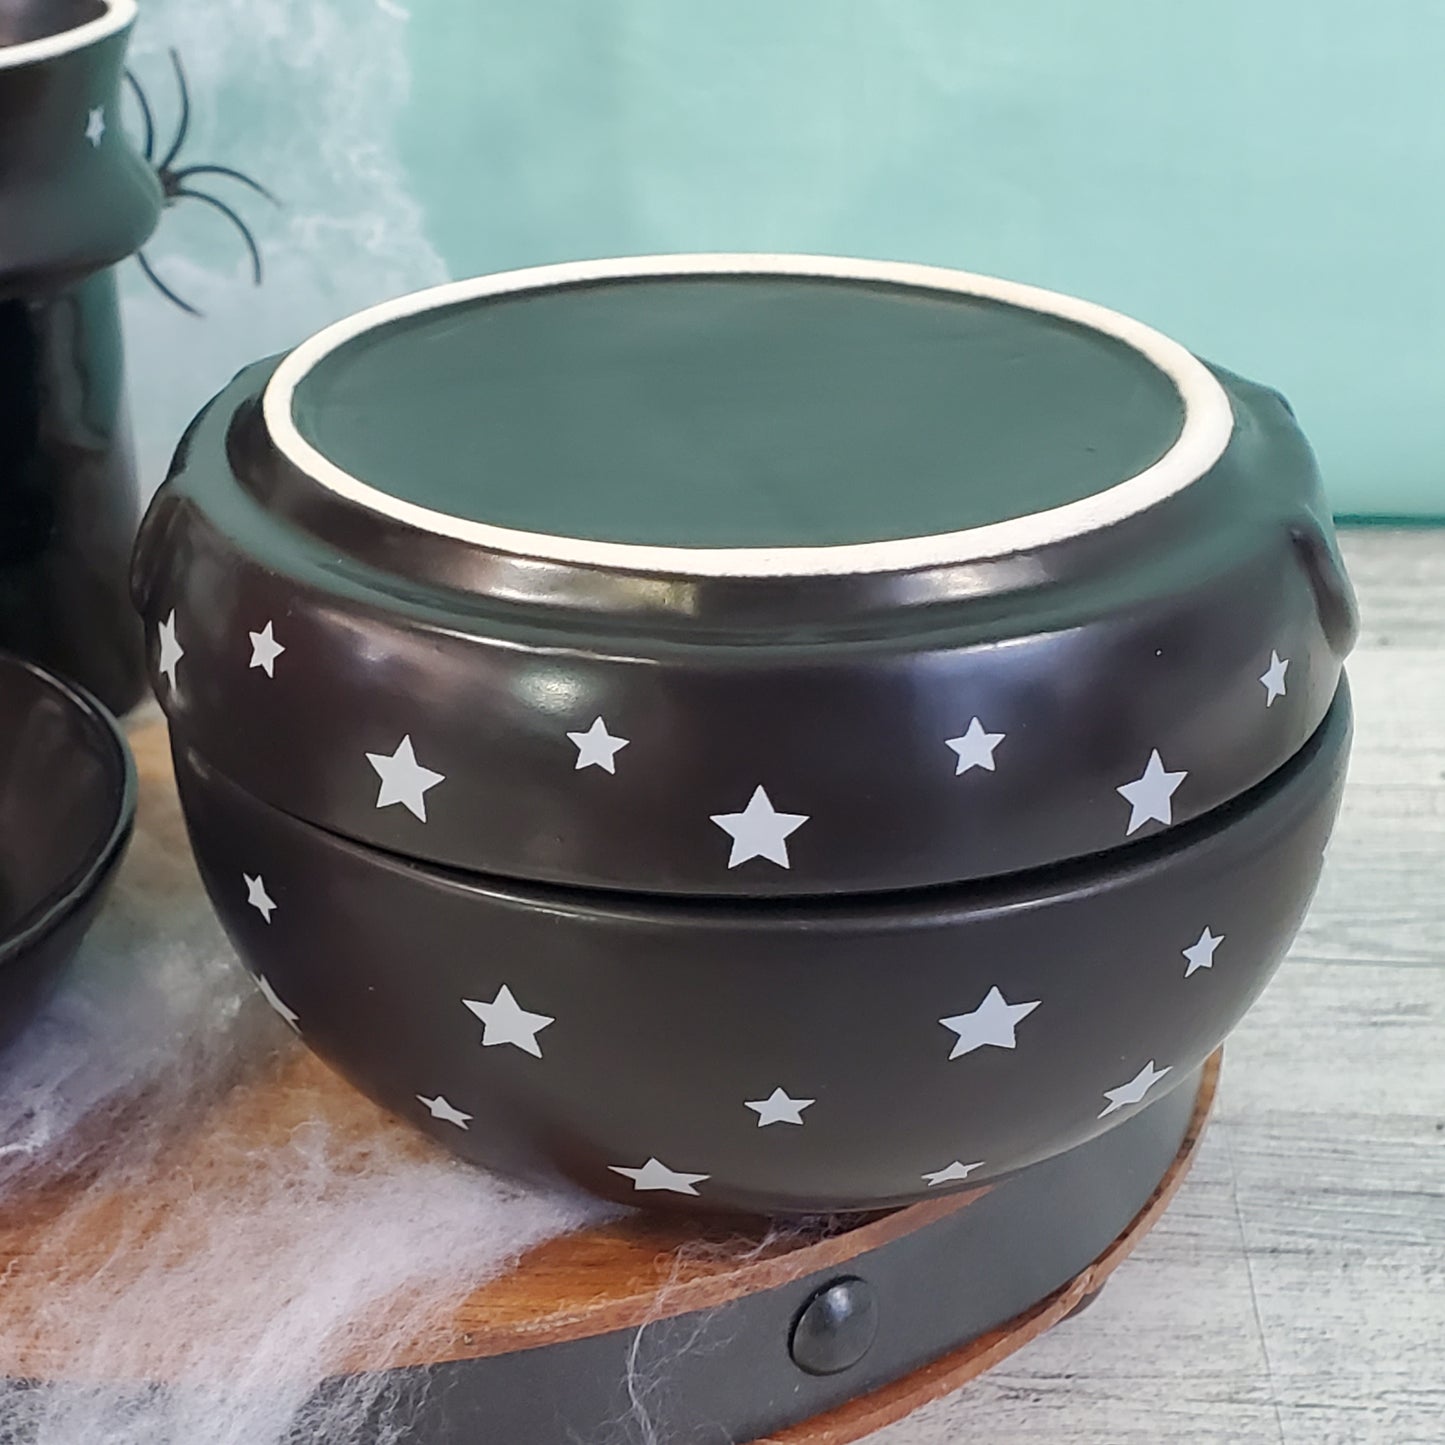 Witch's Cauldron Ceramic Measuring Cups Set by 10 Strawberry Street - 4-Piece Black with White Stars